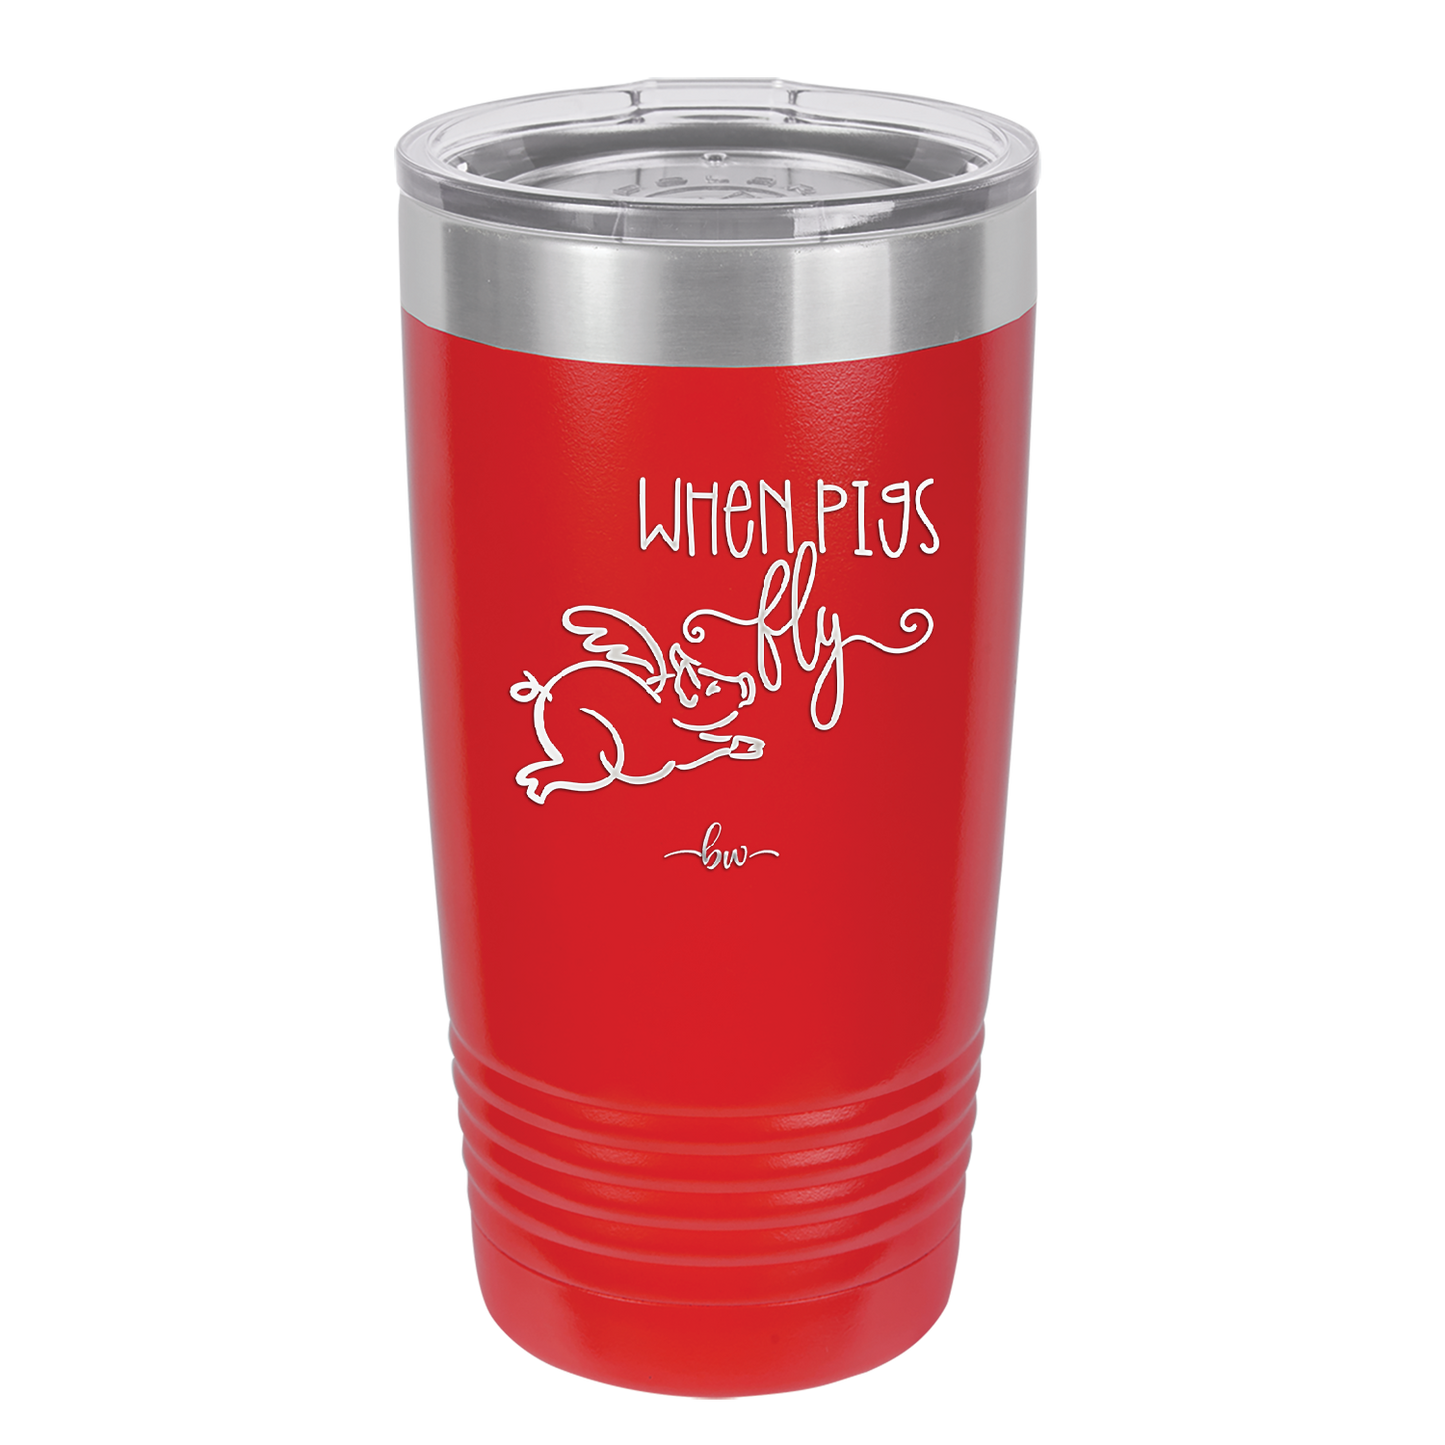 When Pigs Fly - Laser Engraved Stainless Steel Drinkware - 2401 -